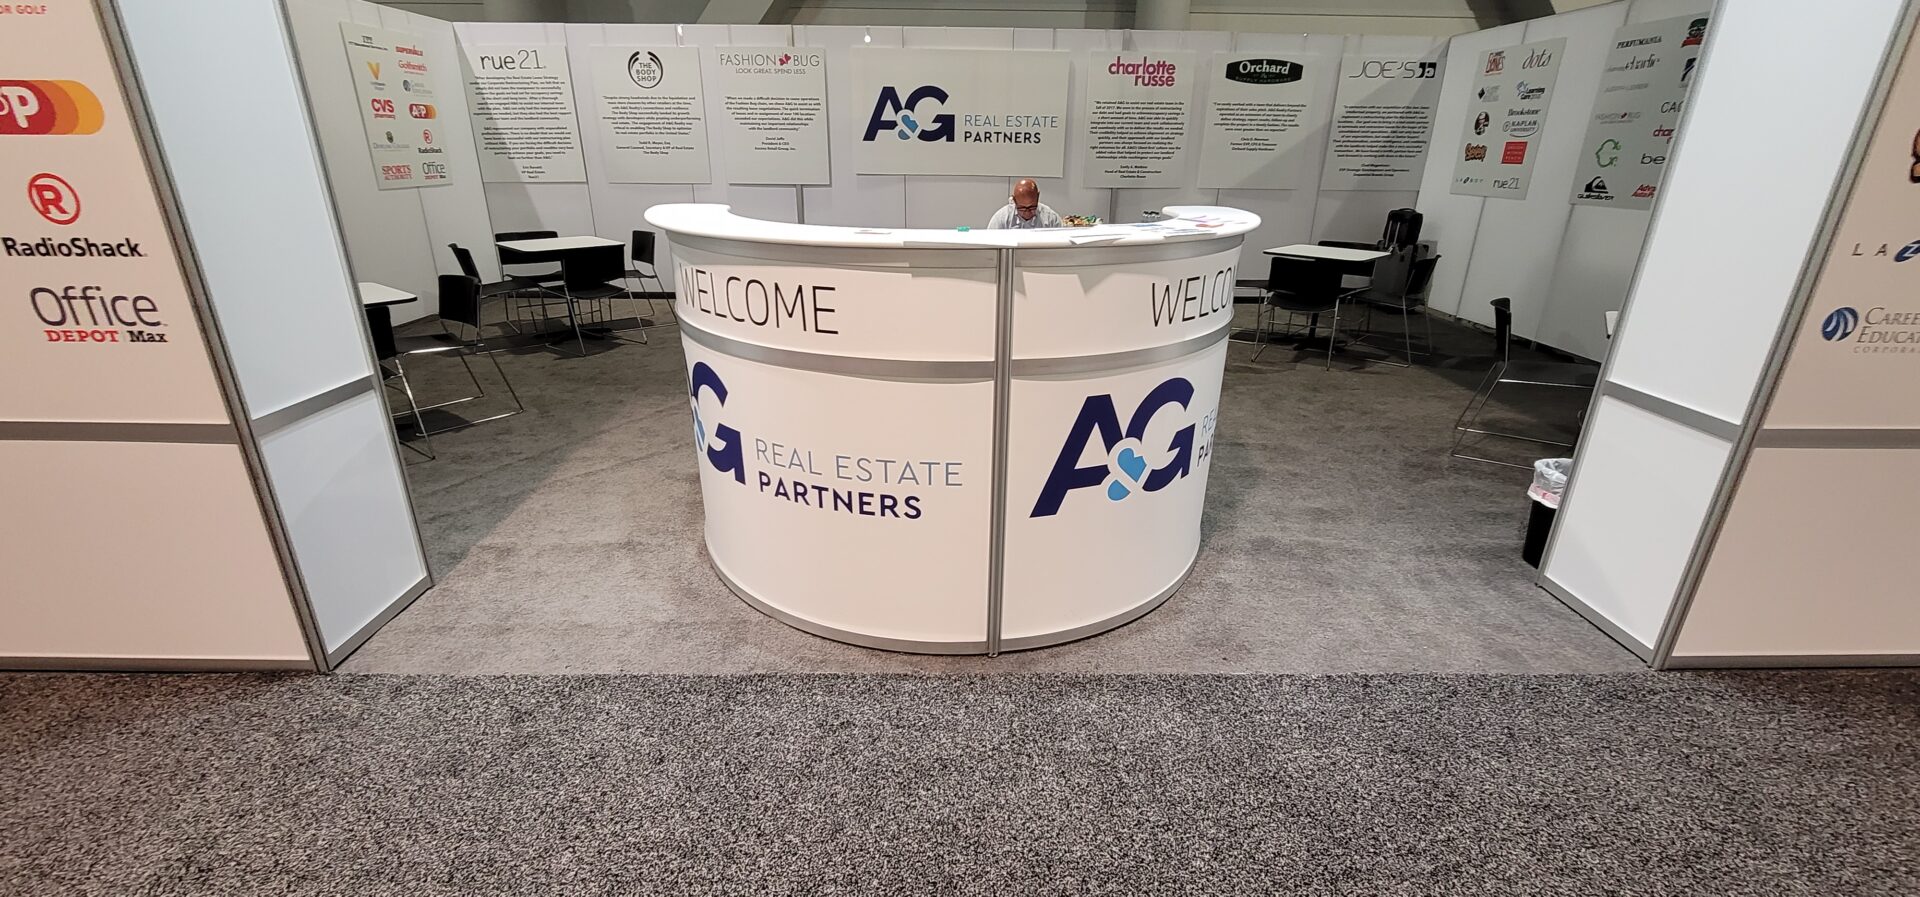 A welcome counter for AG Real Estate Partners booth